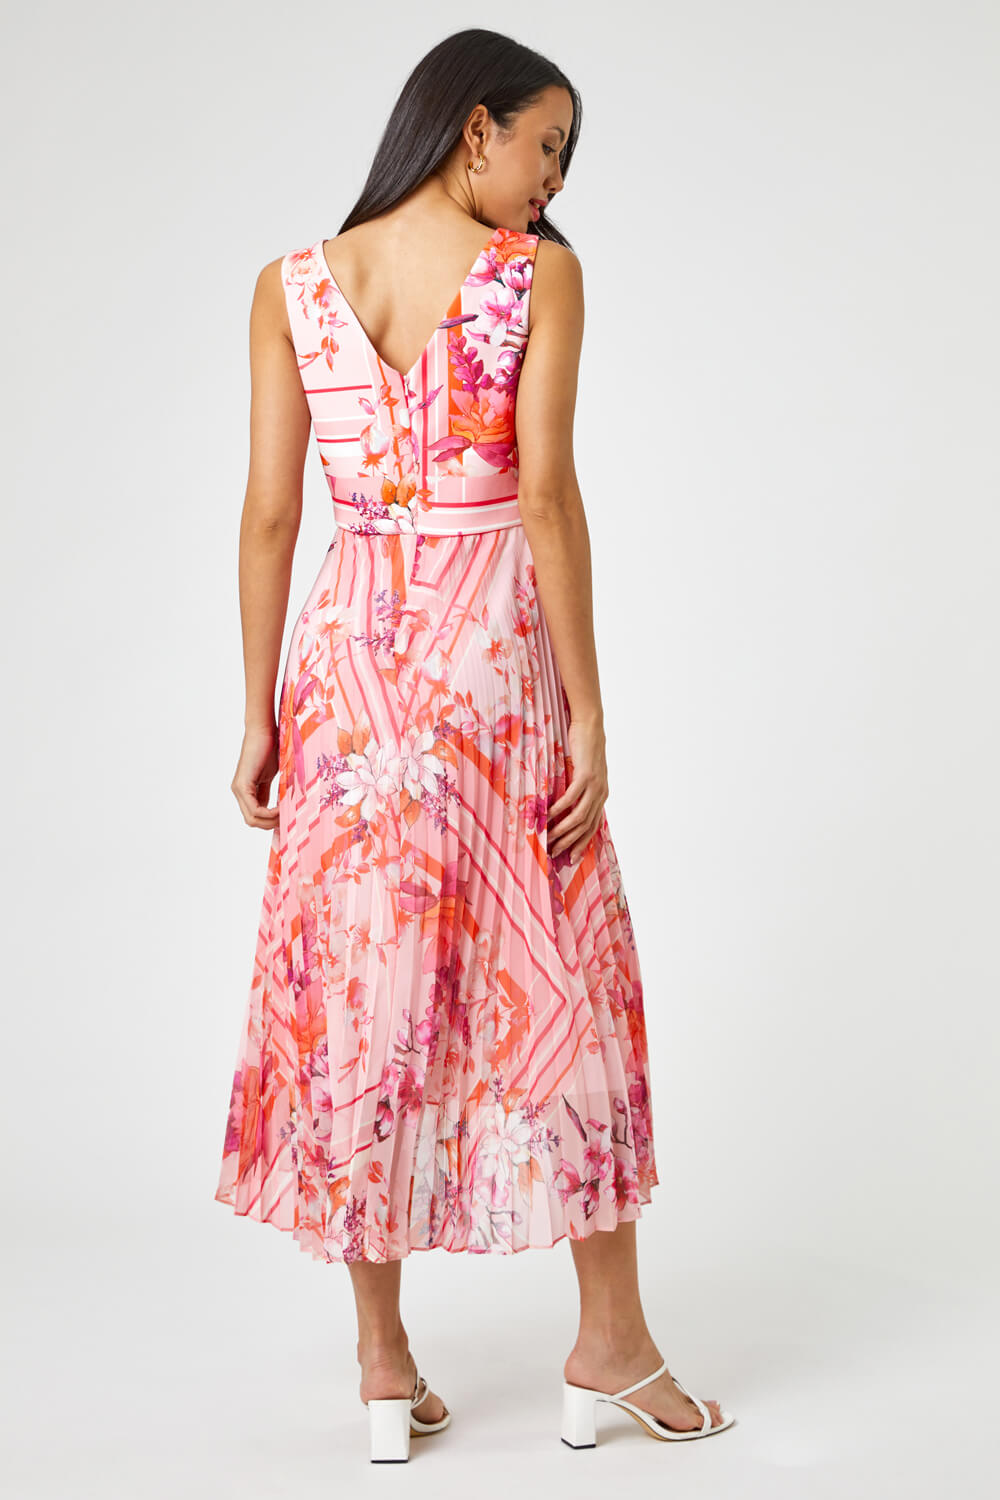 PINK Floral Print Fit And Flare Pleated Dress, Image 2 of 4